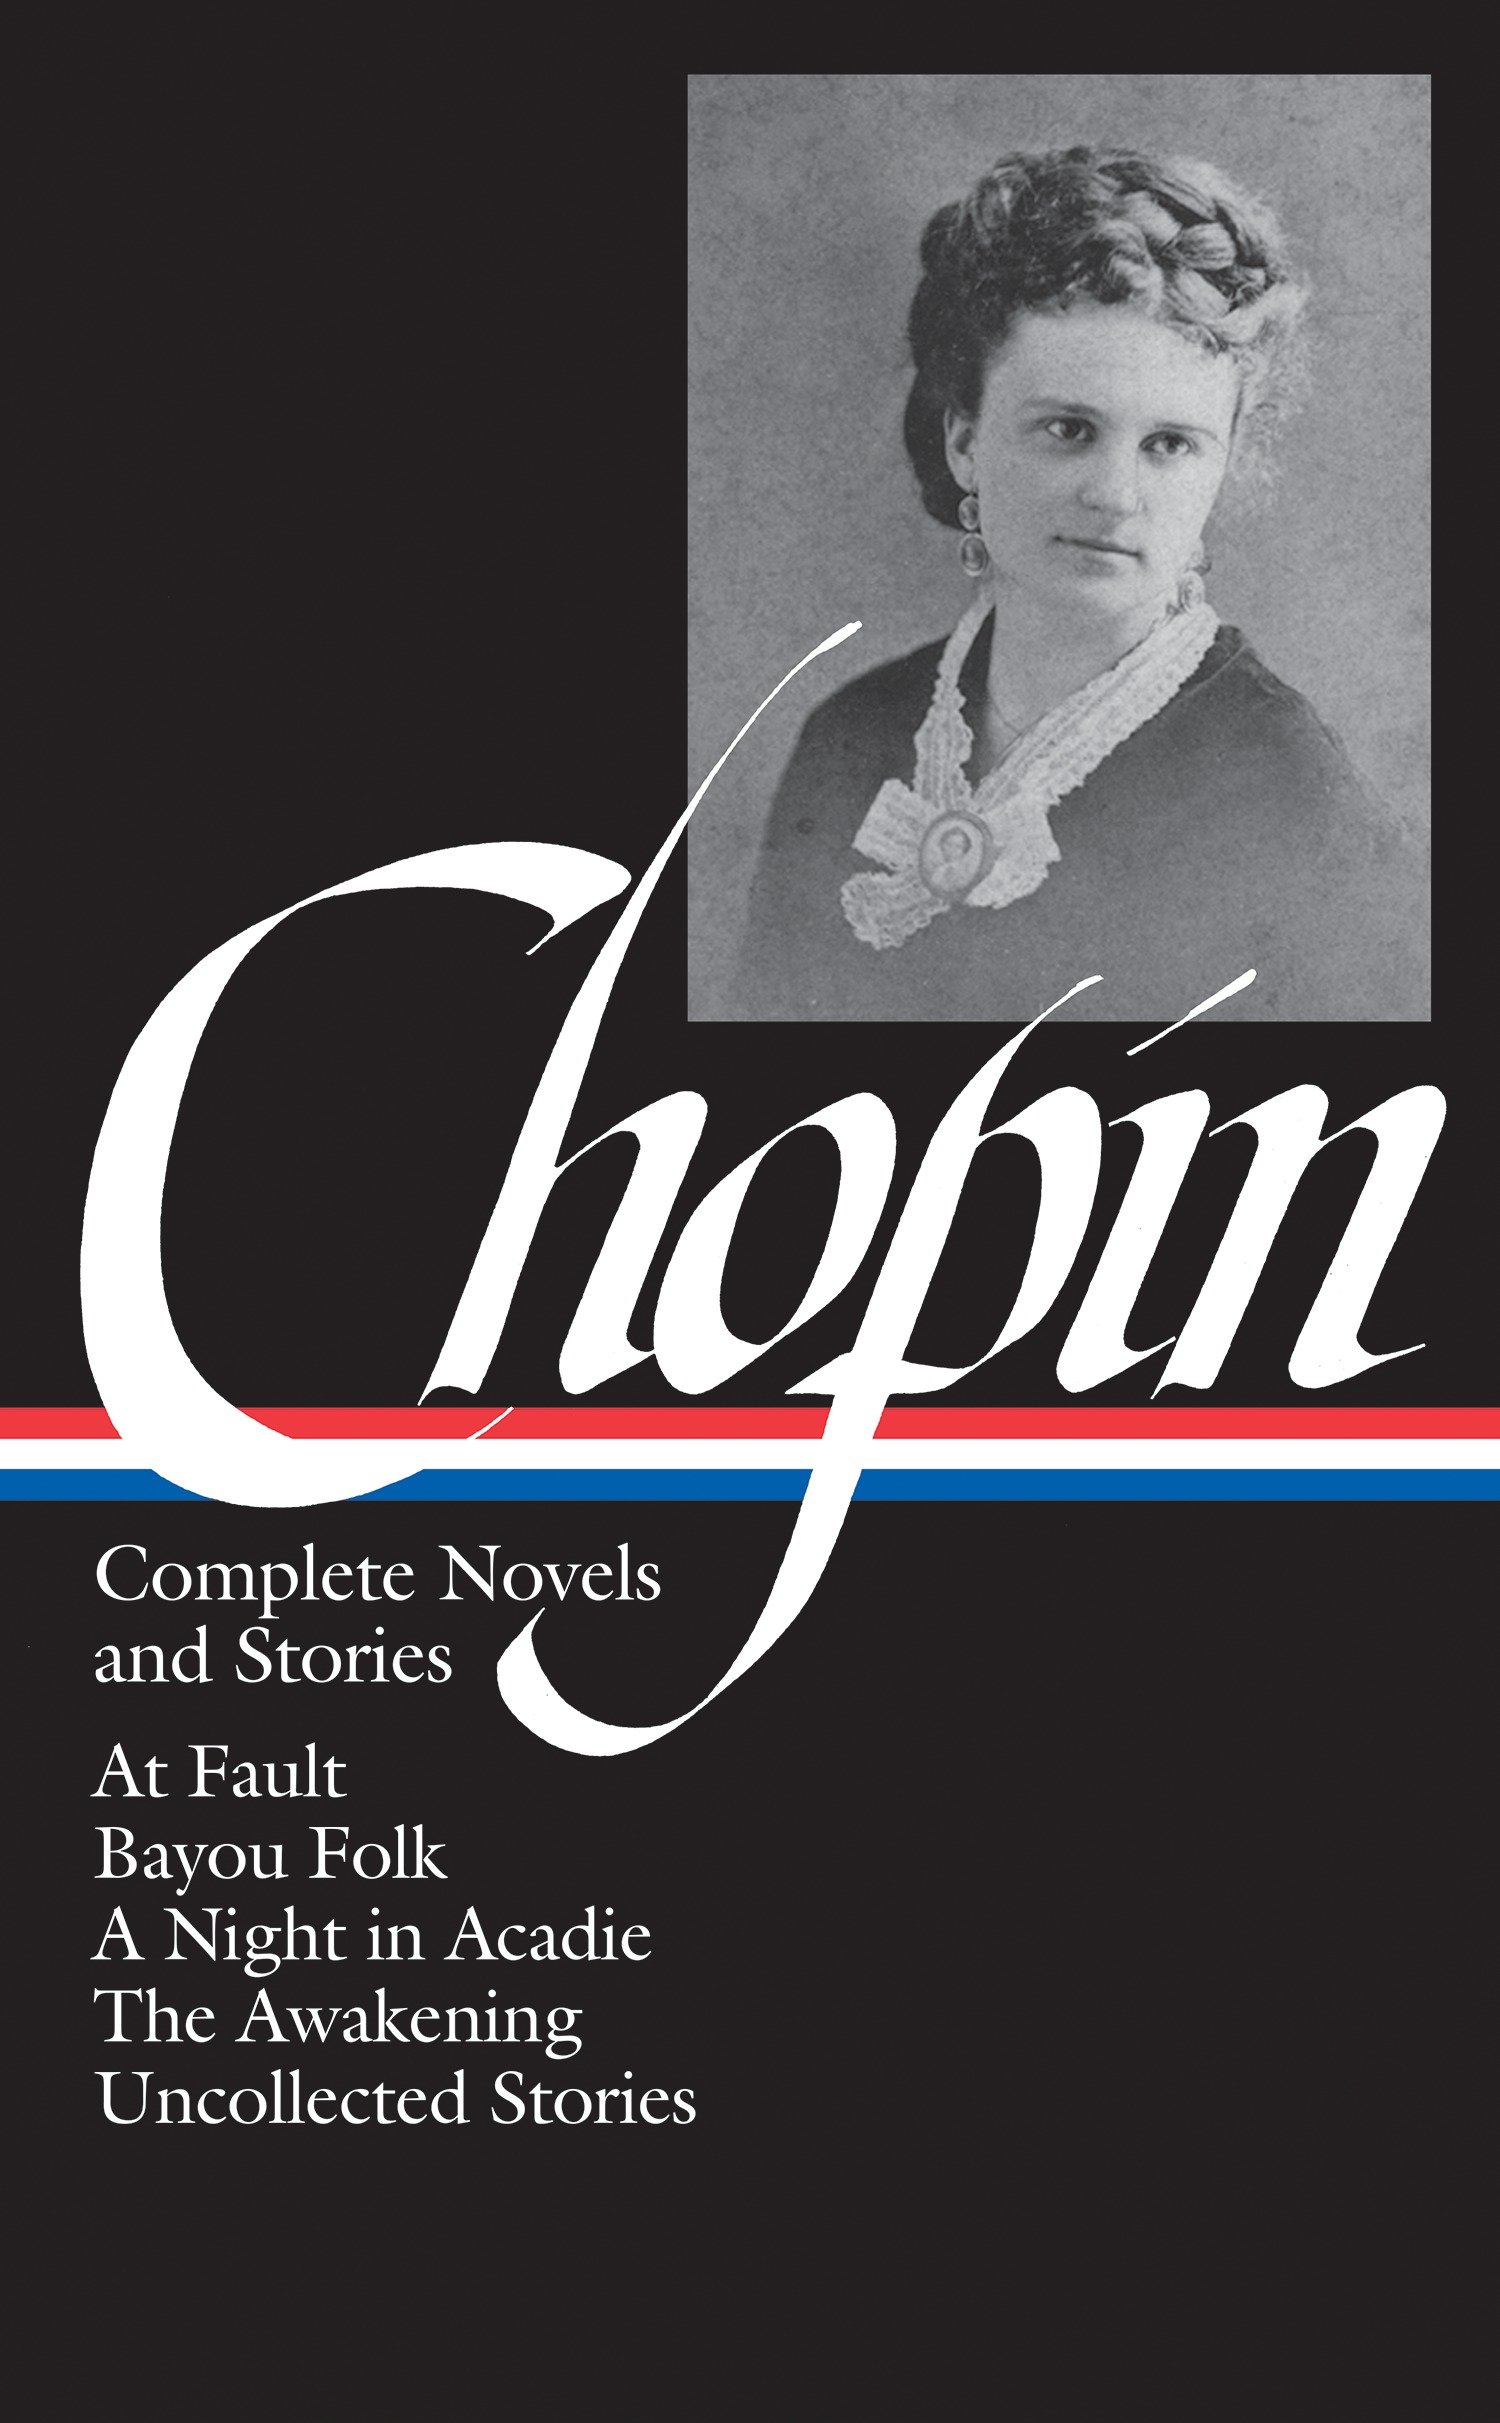 Kate Chopin: Complete Novels And Stories (Loa #136) (Hardcover Book)